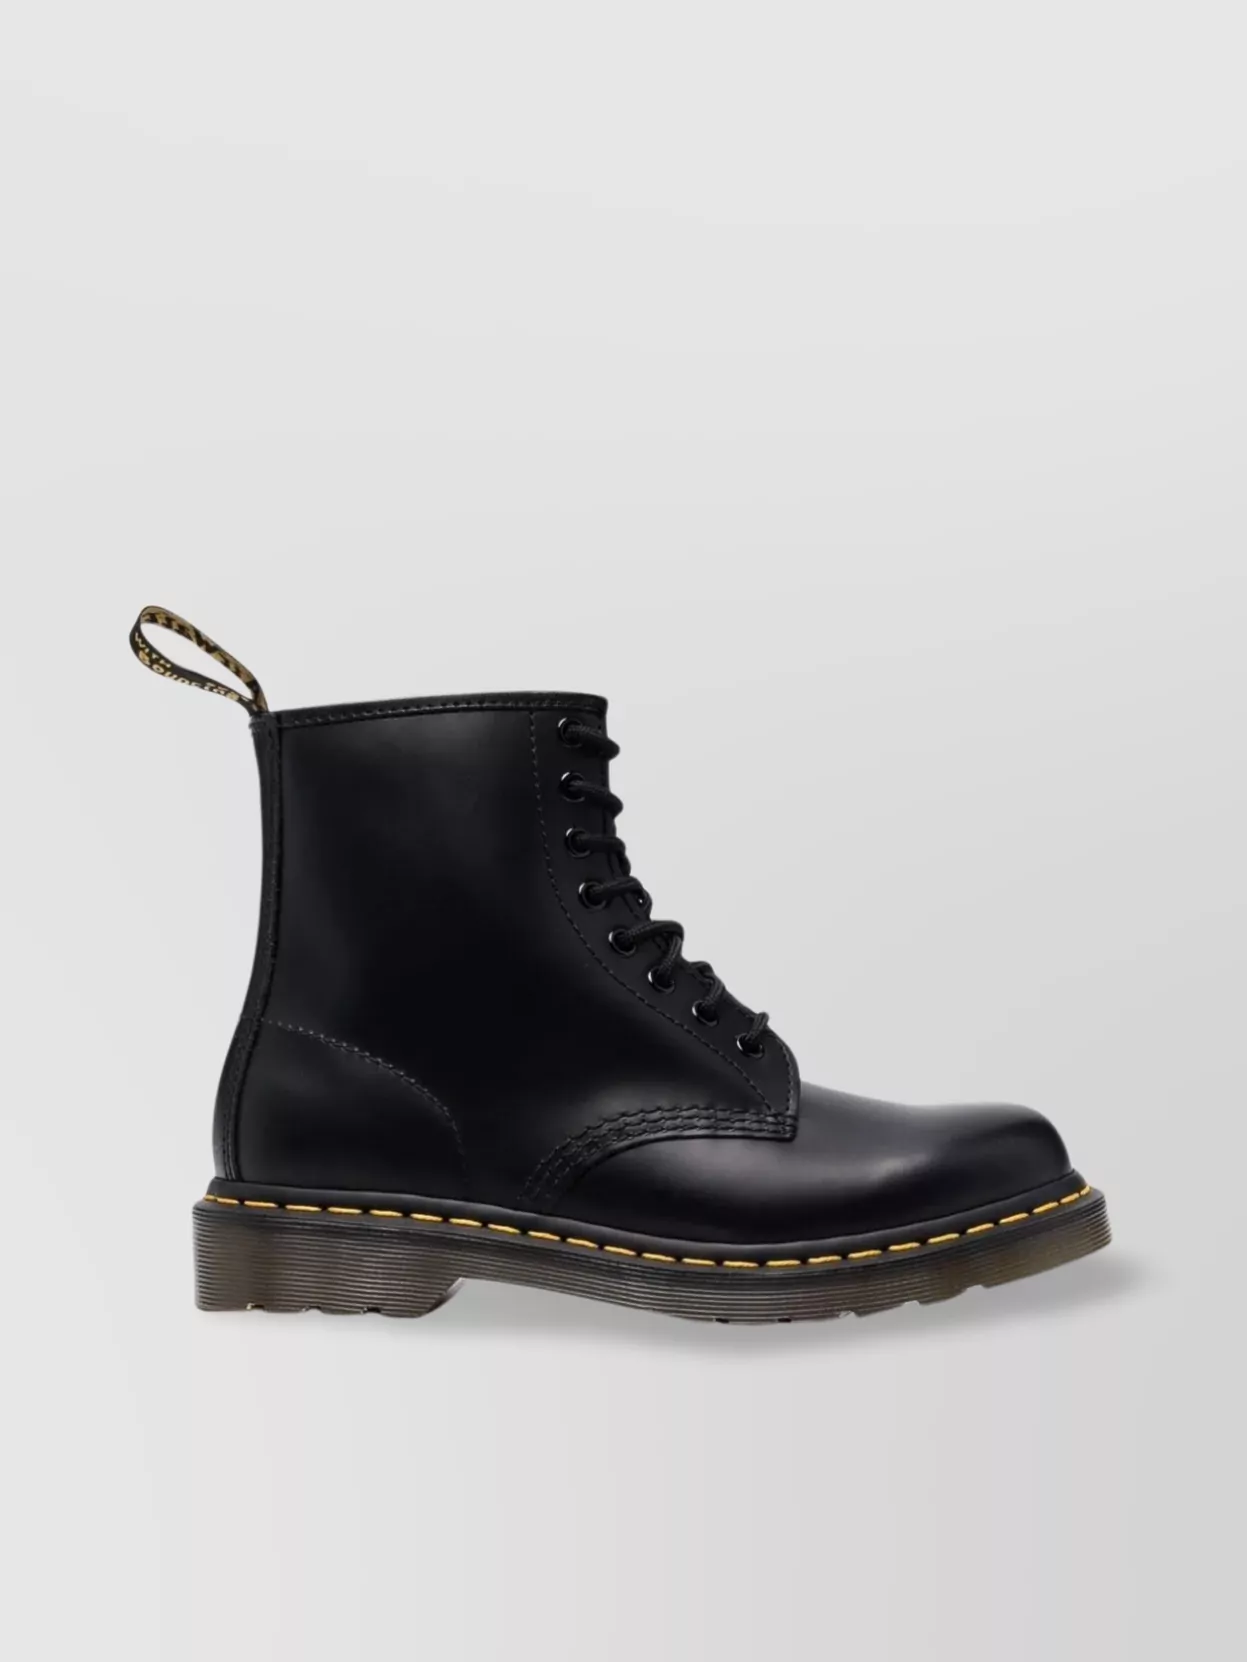 Shop Dr. Martens' Iconic Round Toe Rubber Sole Boots In Black